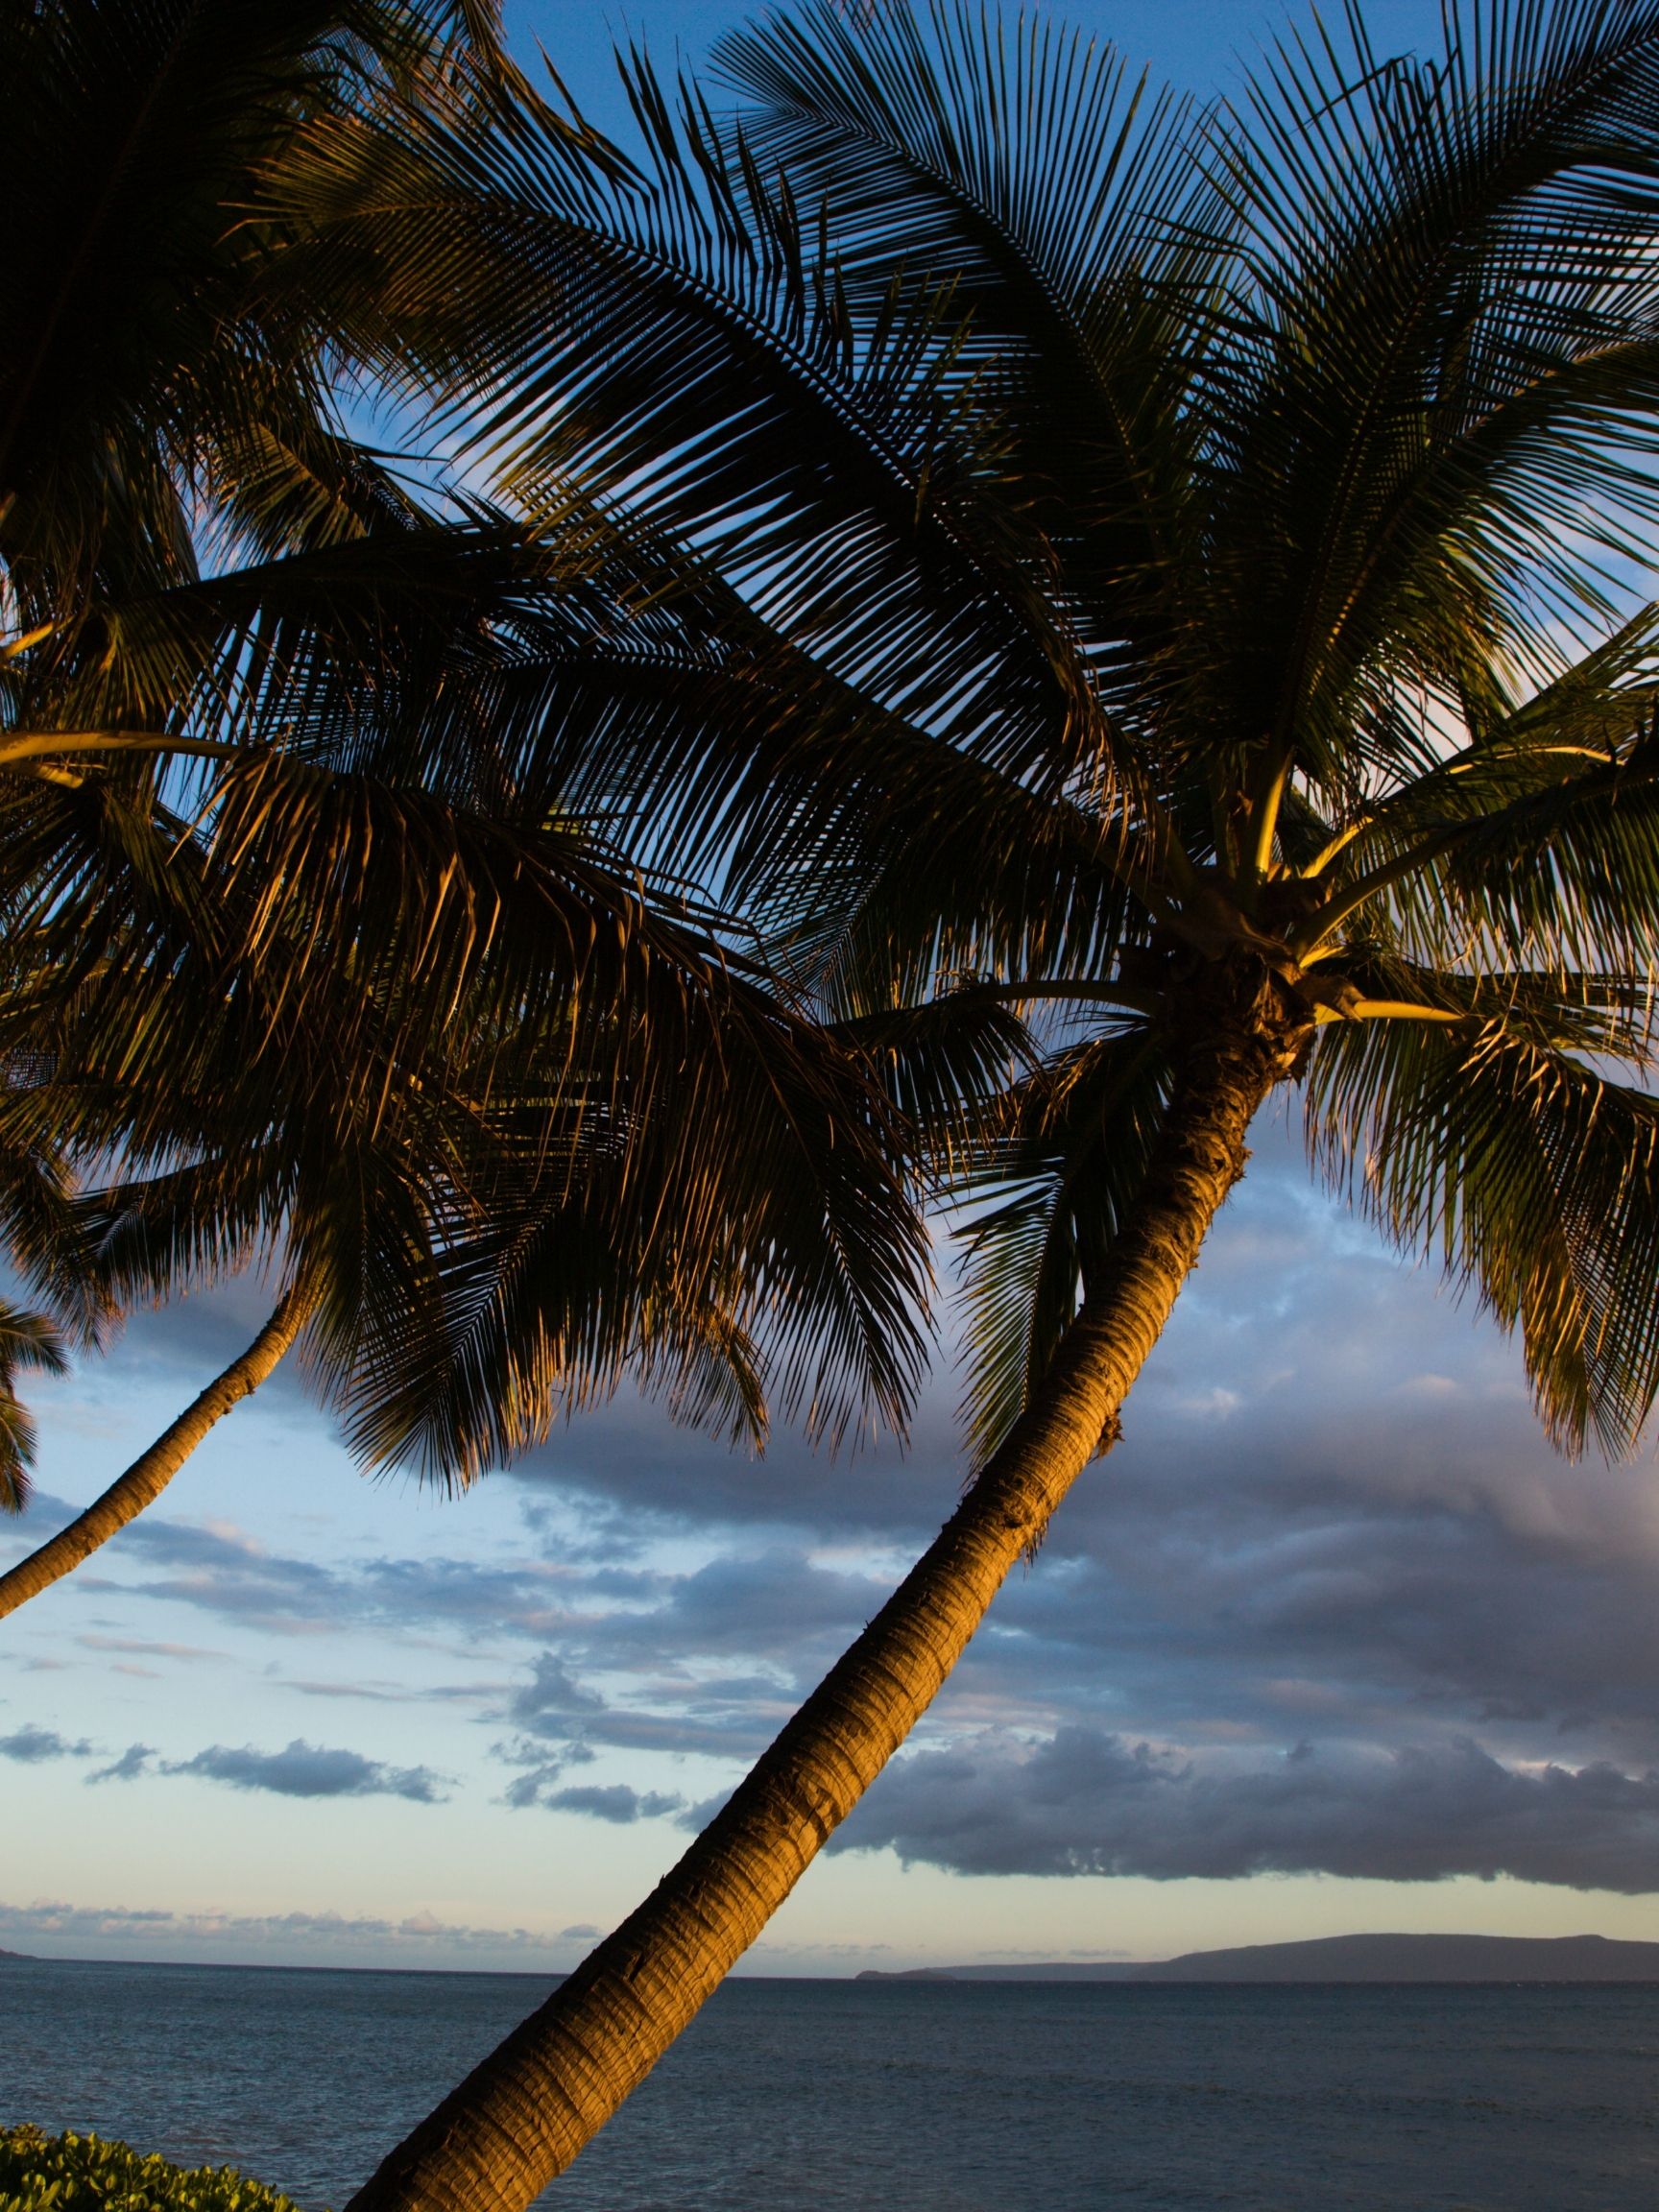 Palm trees await visitors to Hawaii